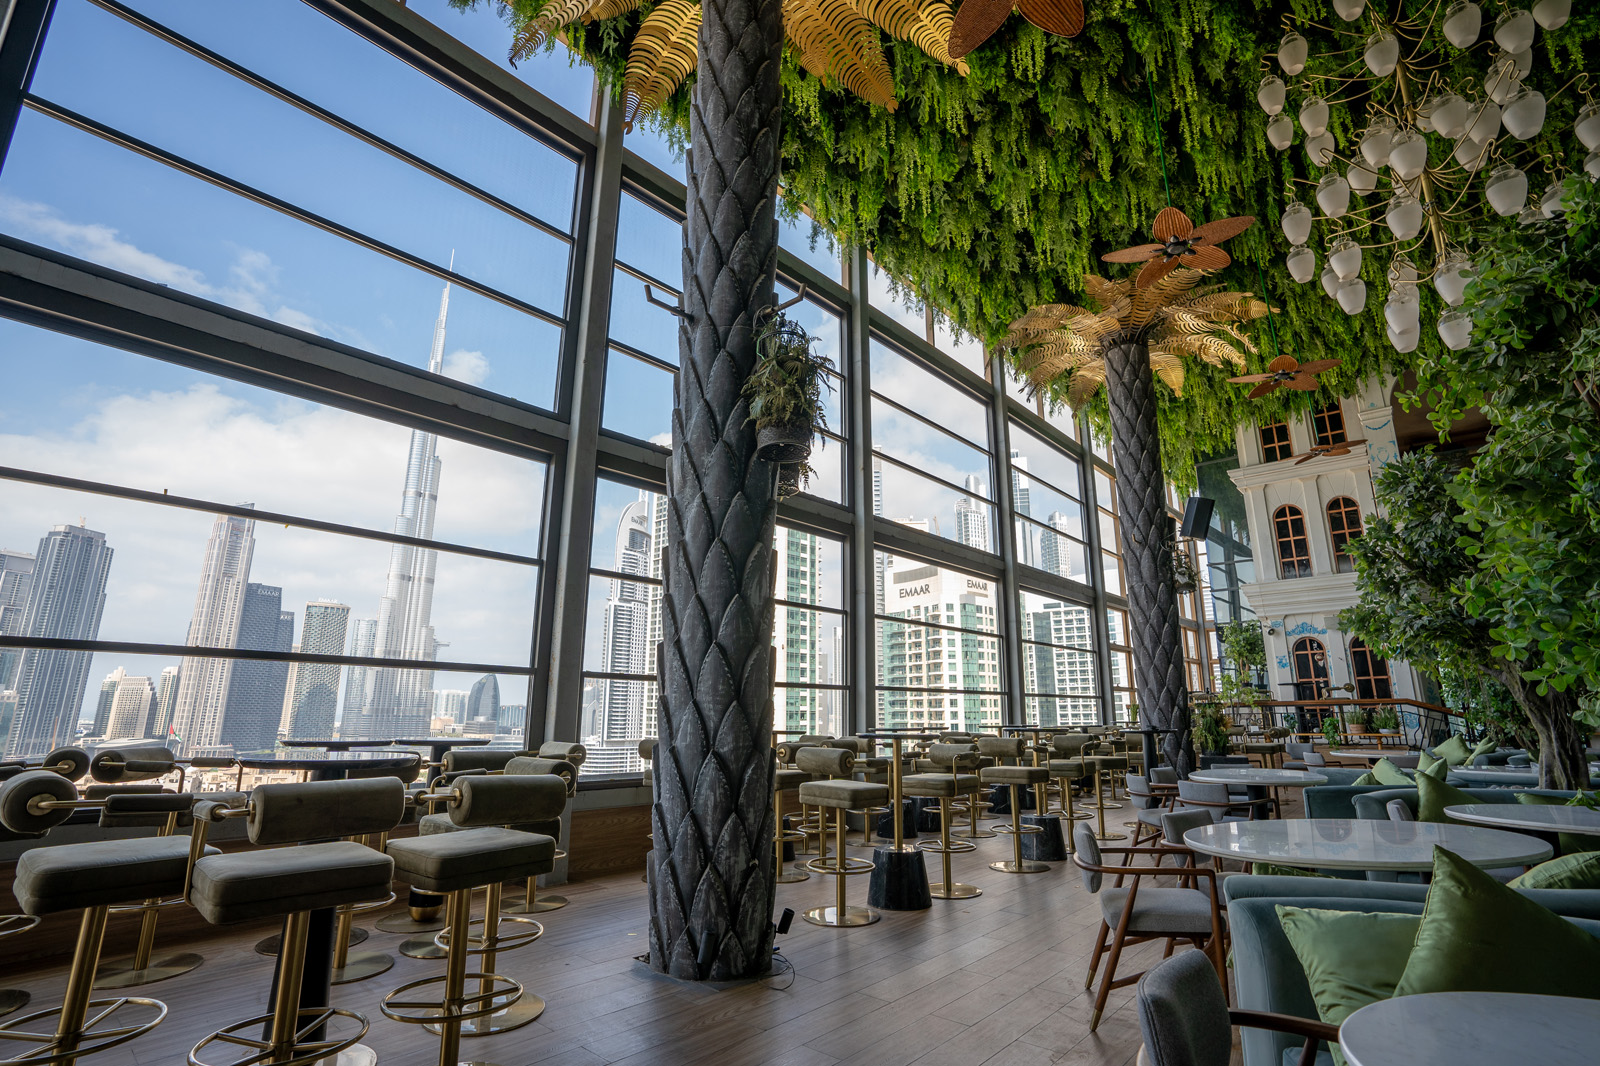 Vice Club Dubai: Redefining Outdoor Spaces with Retractable Parapet Glass System